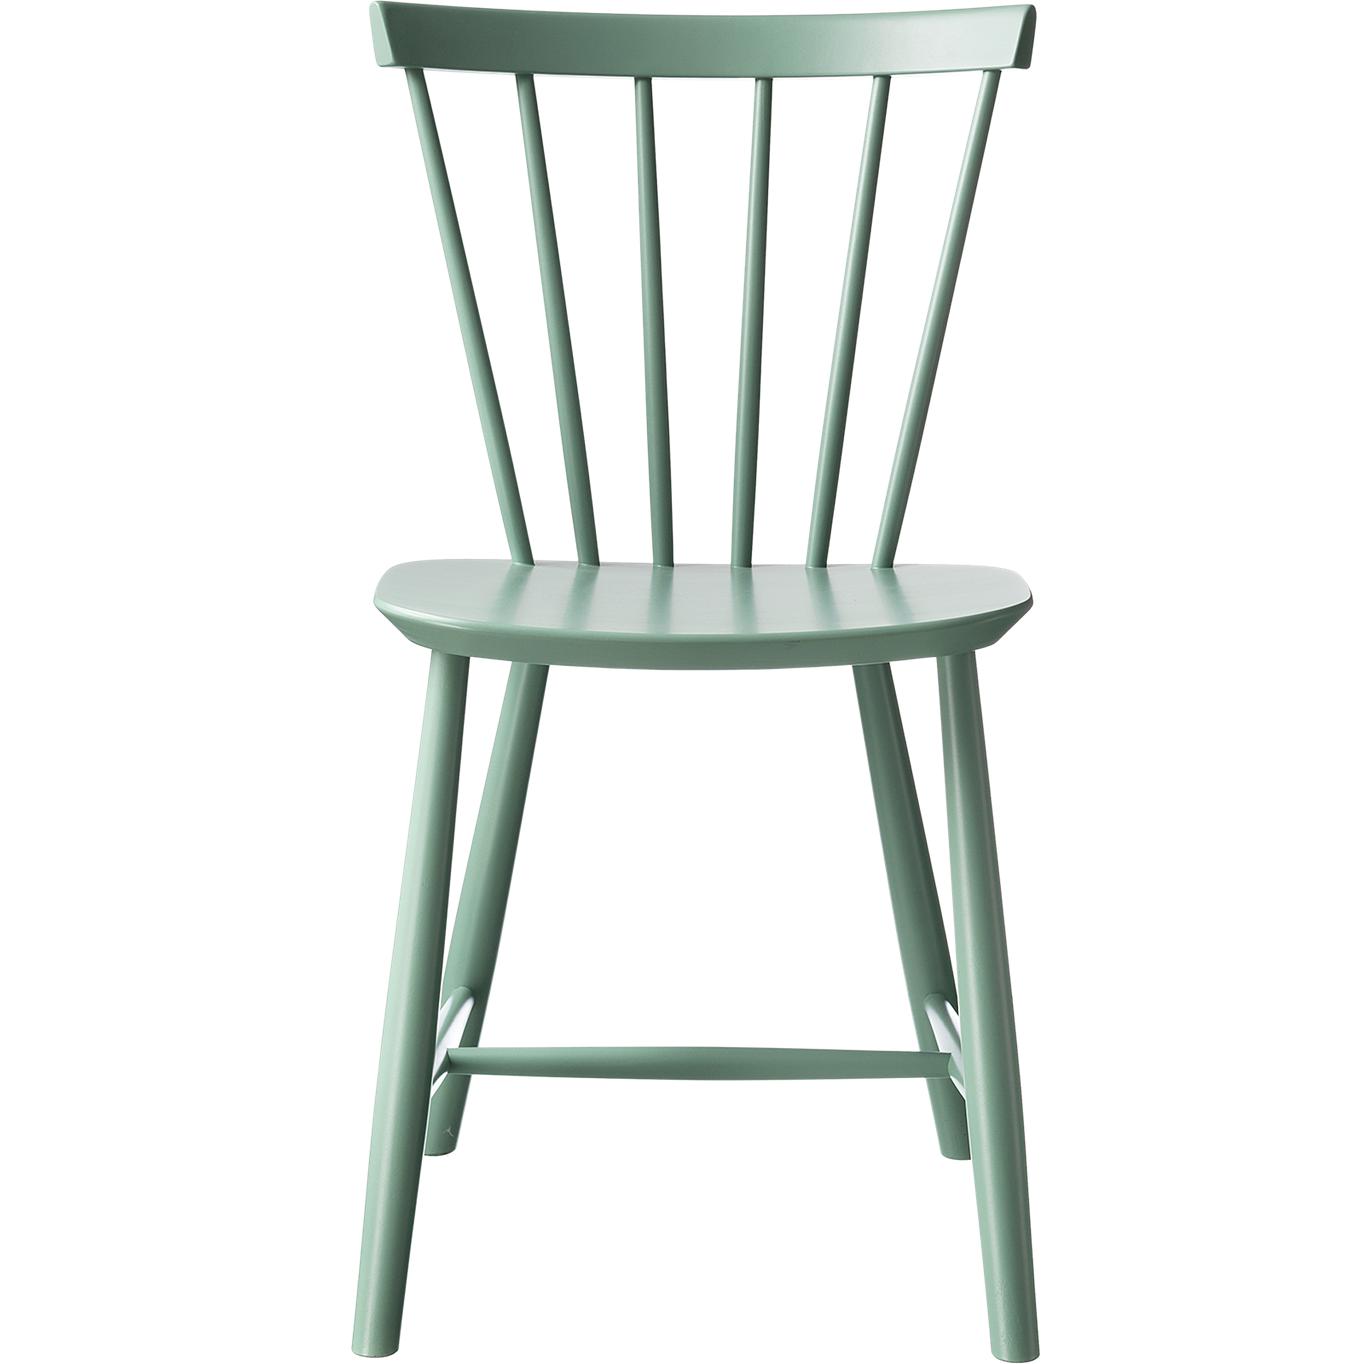 Fdb Møbler Poul Volther J46 Dining Chair Beech, Dust Green, H 80cm